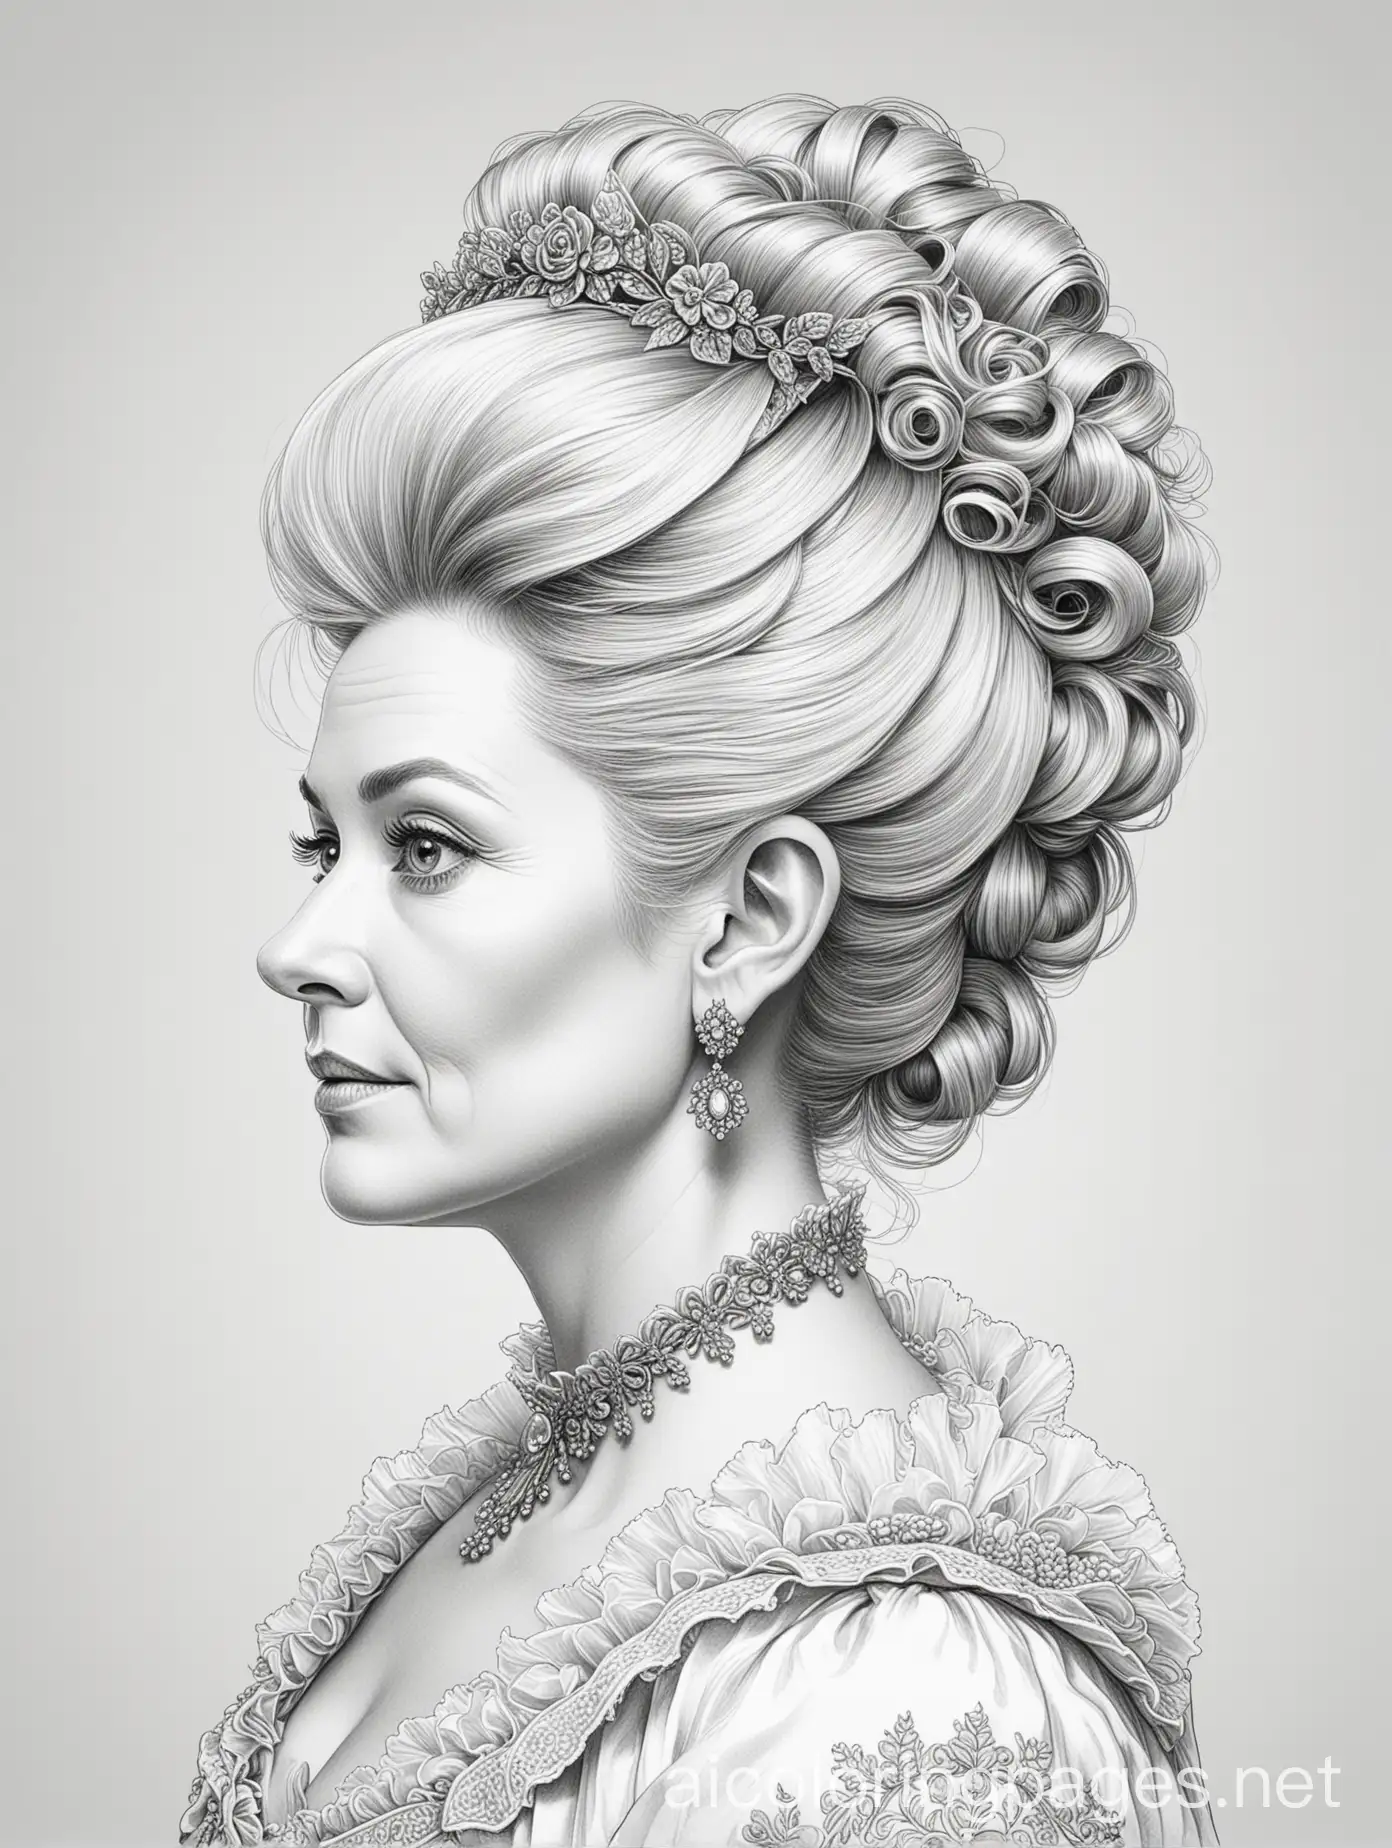 portrait of an older woman looking away with a fancy Bridgerton updo and a fancy dress, Coloring Page, black and white, line art, white background, Simplicity, Ample White Space. The background of the coloring page is plain white to make it easy for young children to color within the lines. The outlines of all the subjects are easy to distinguish, making it simple for kids to color without too much difficulty